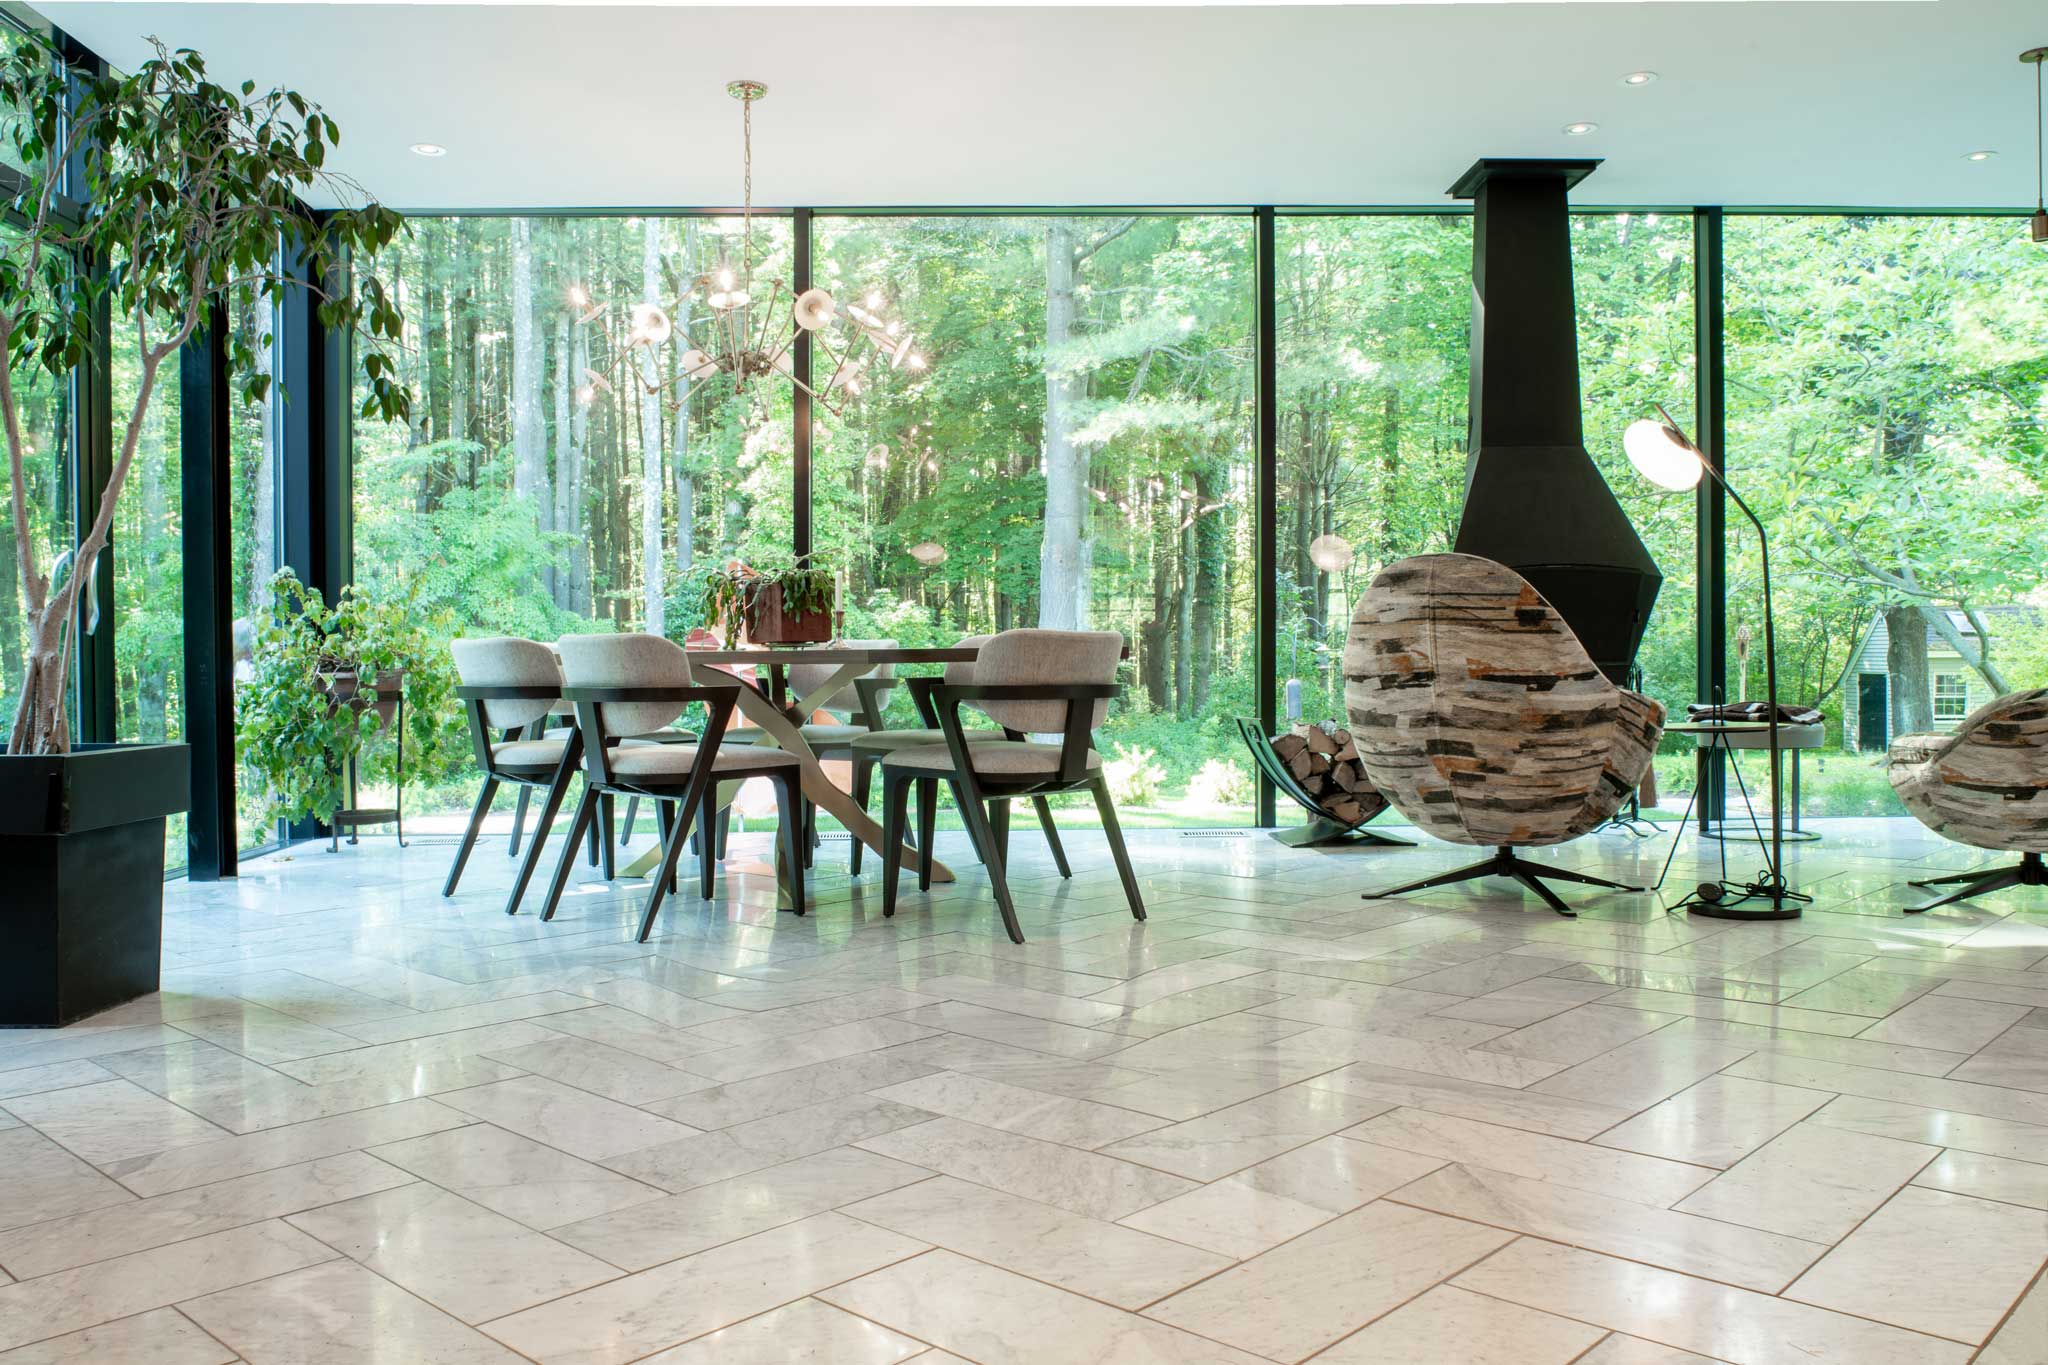 Alternate interior view of the modern addition to this traditional Slingerlands home.